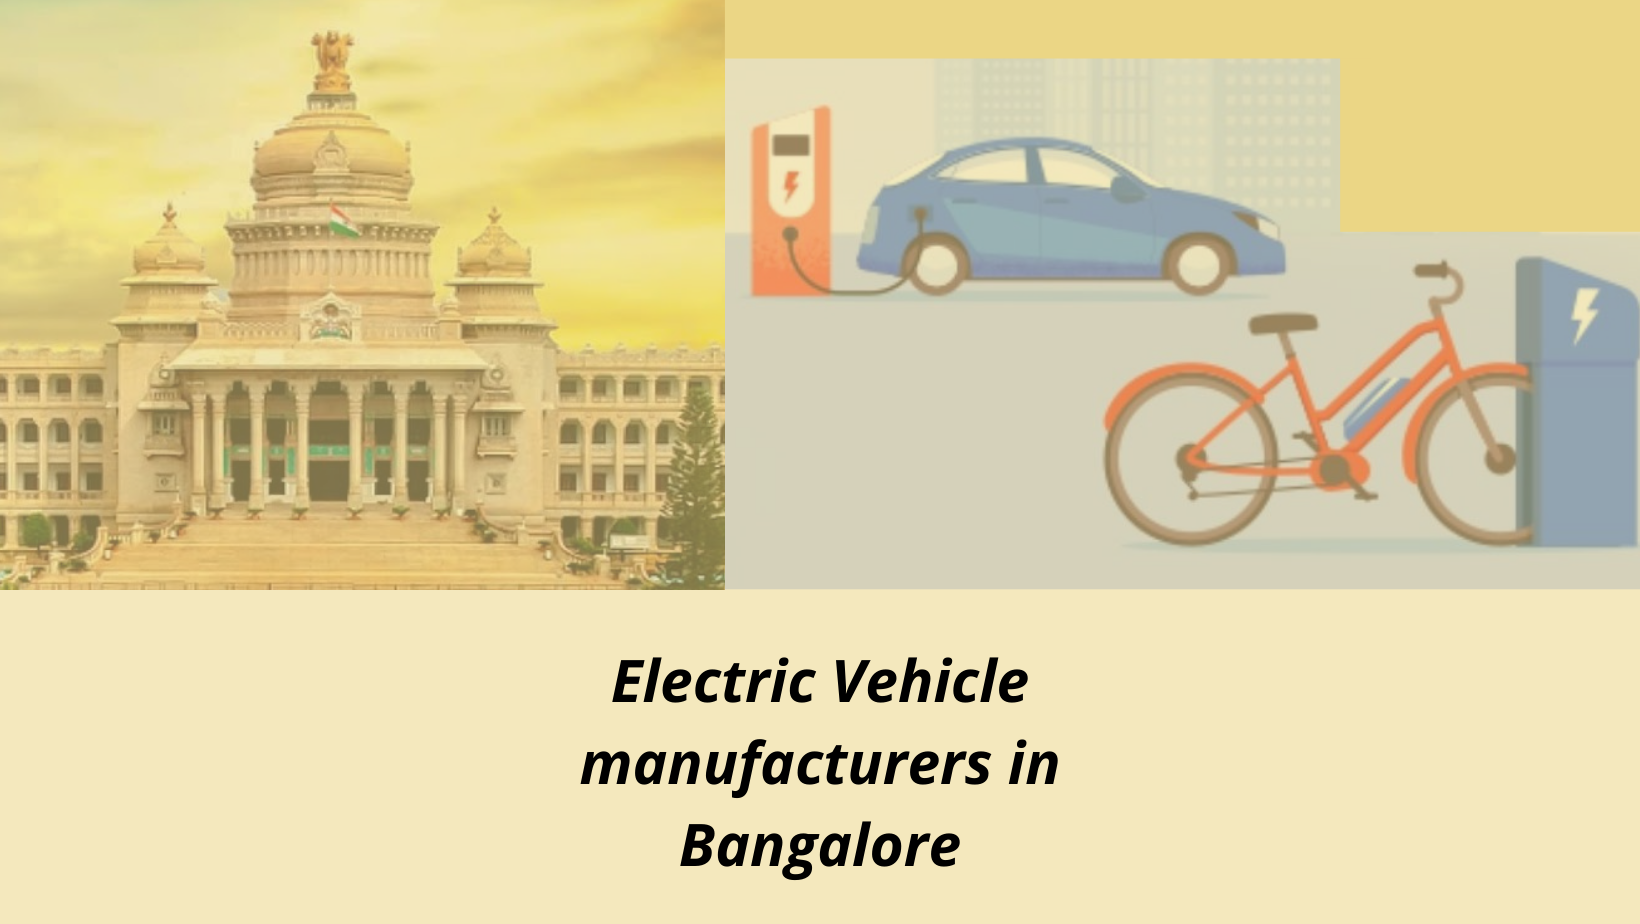 Electric Vehicle manufacturers in Bangalore